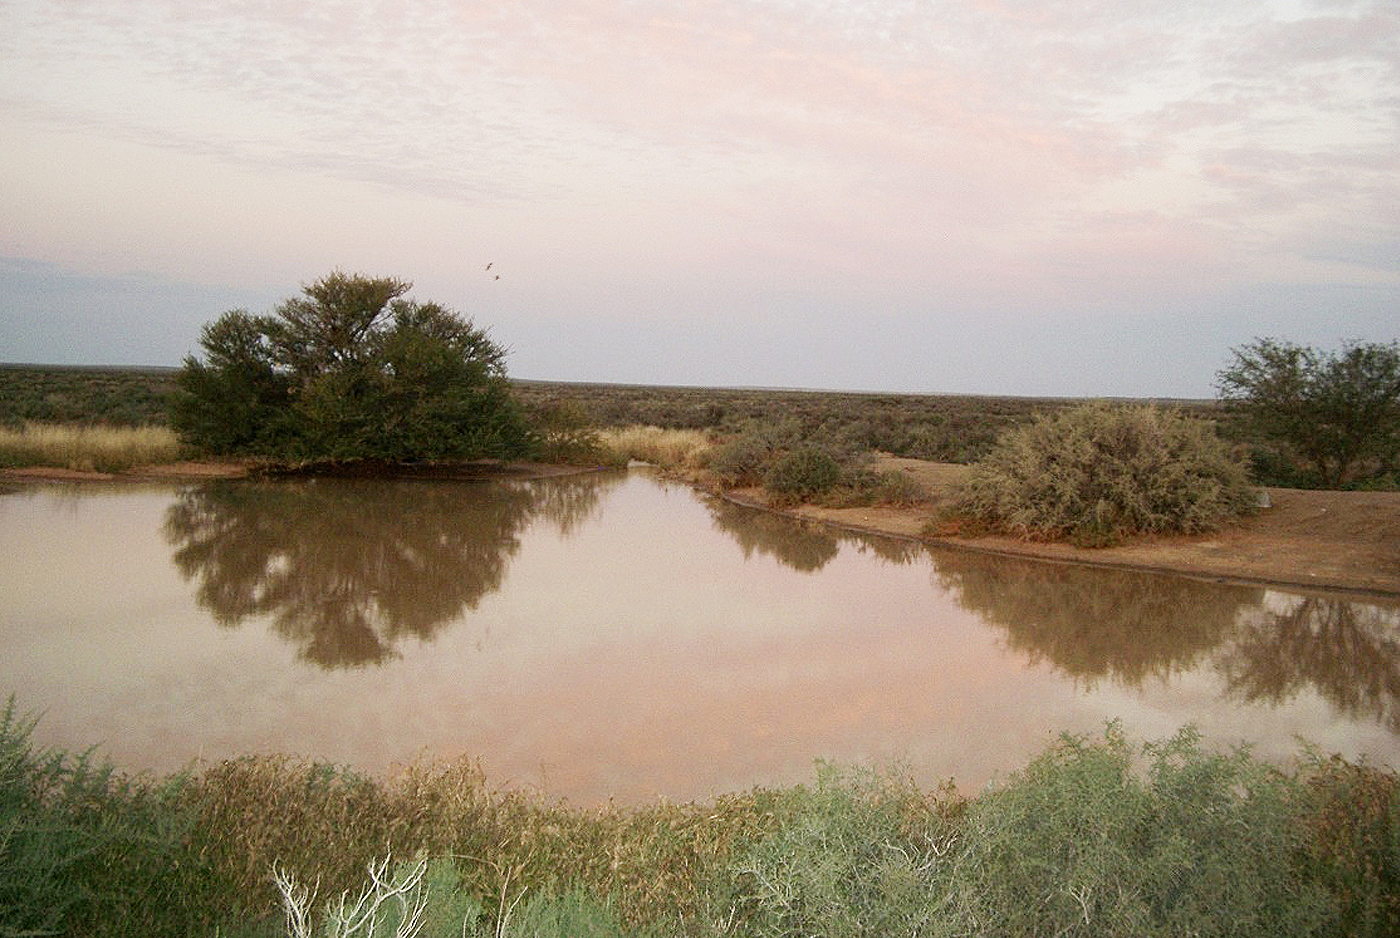 A rare pool of water after rain at the Bitterpits that ǁkabbo called his place.